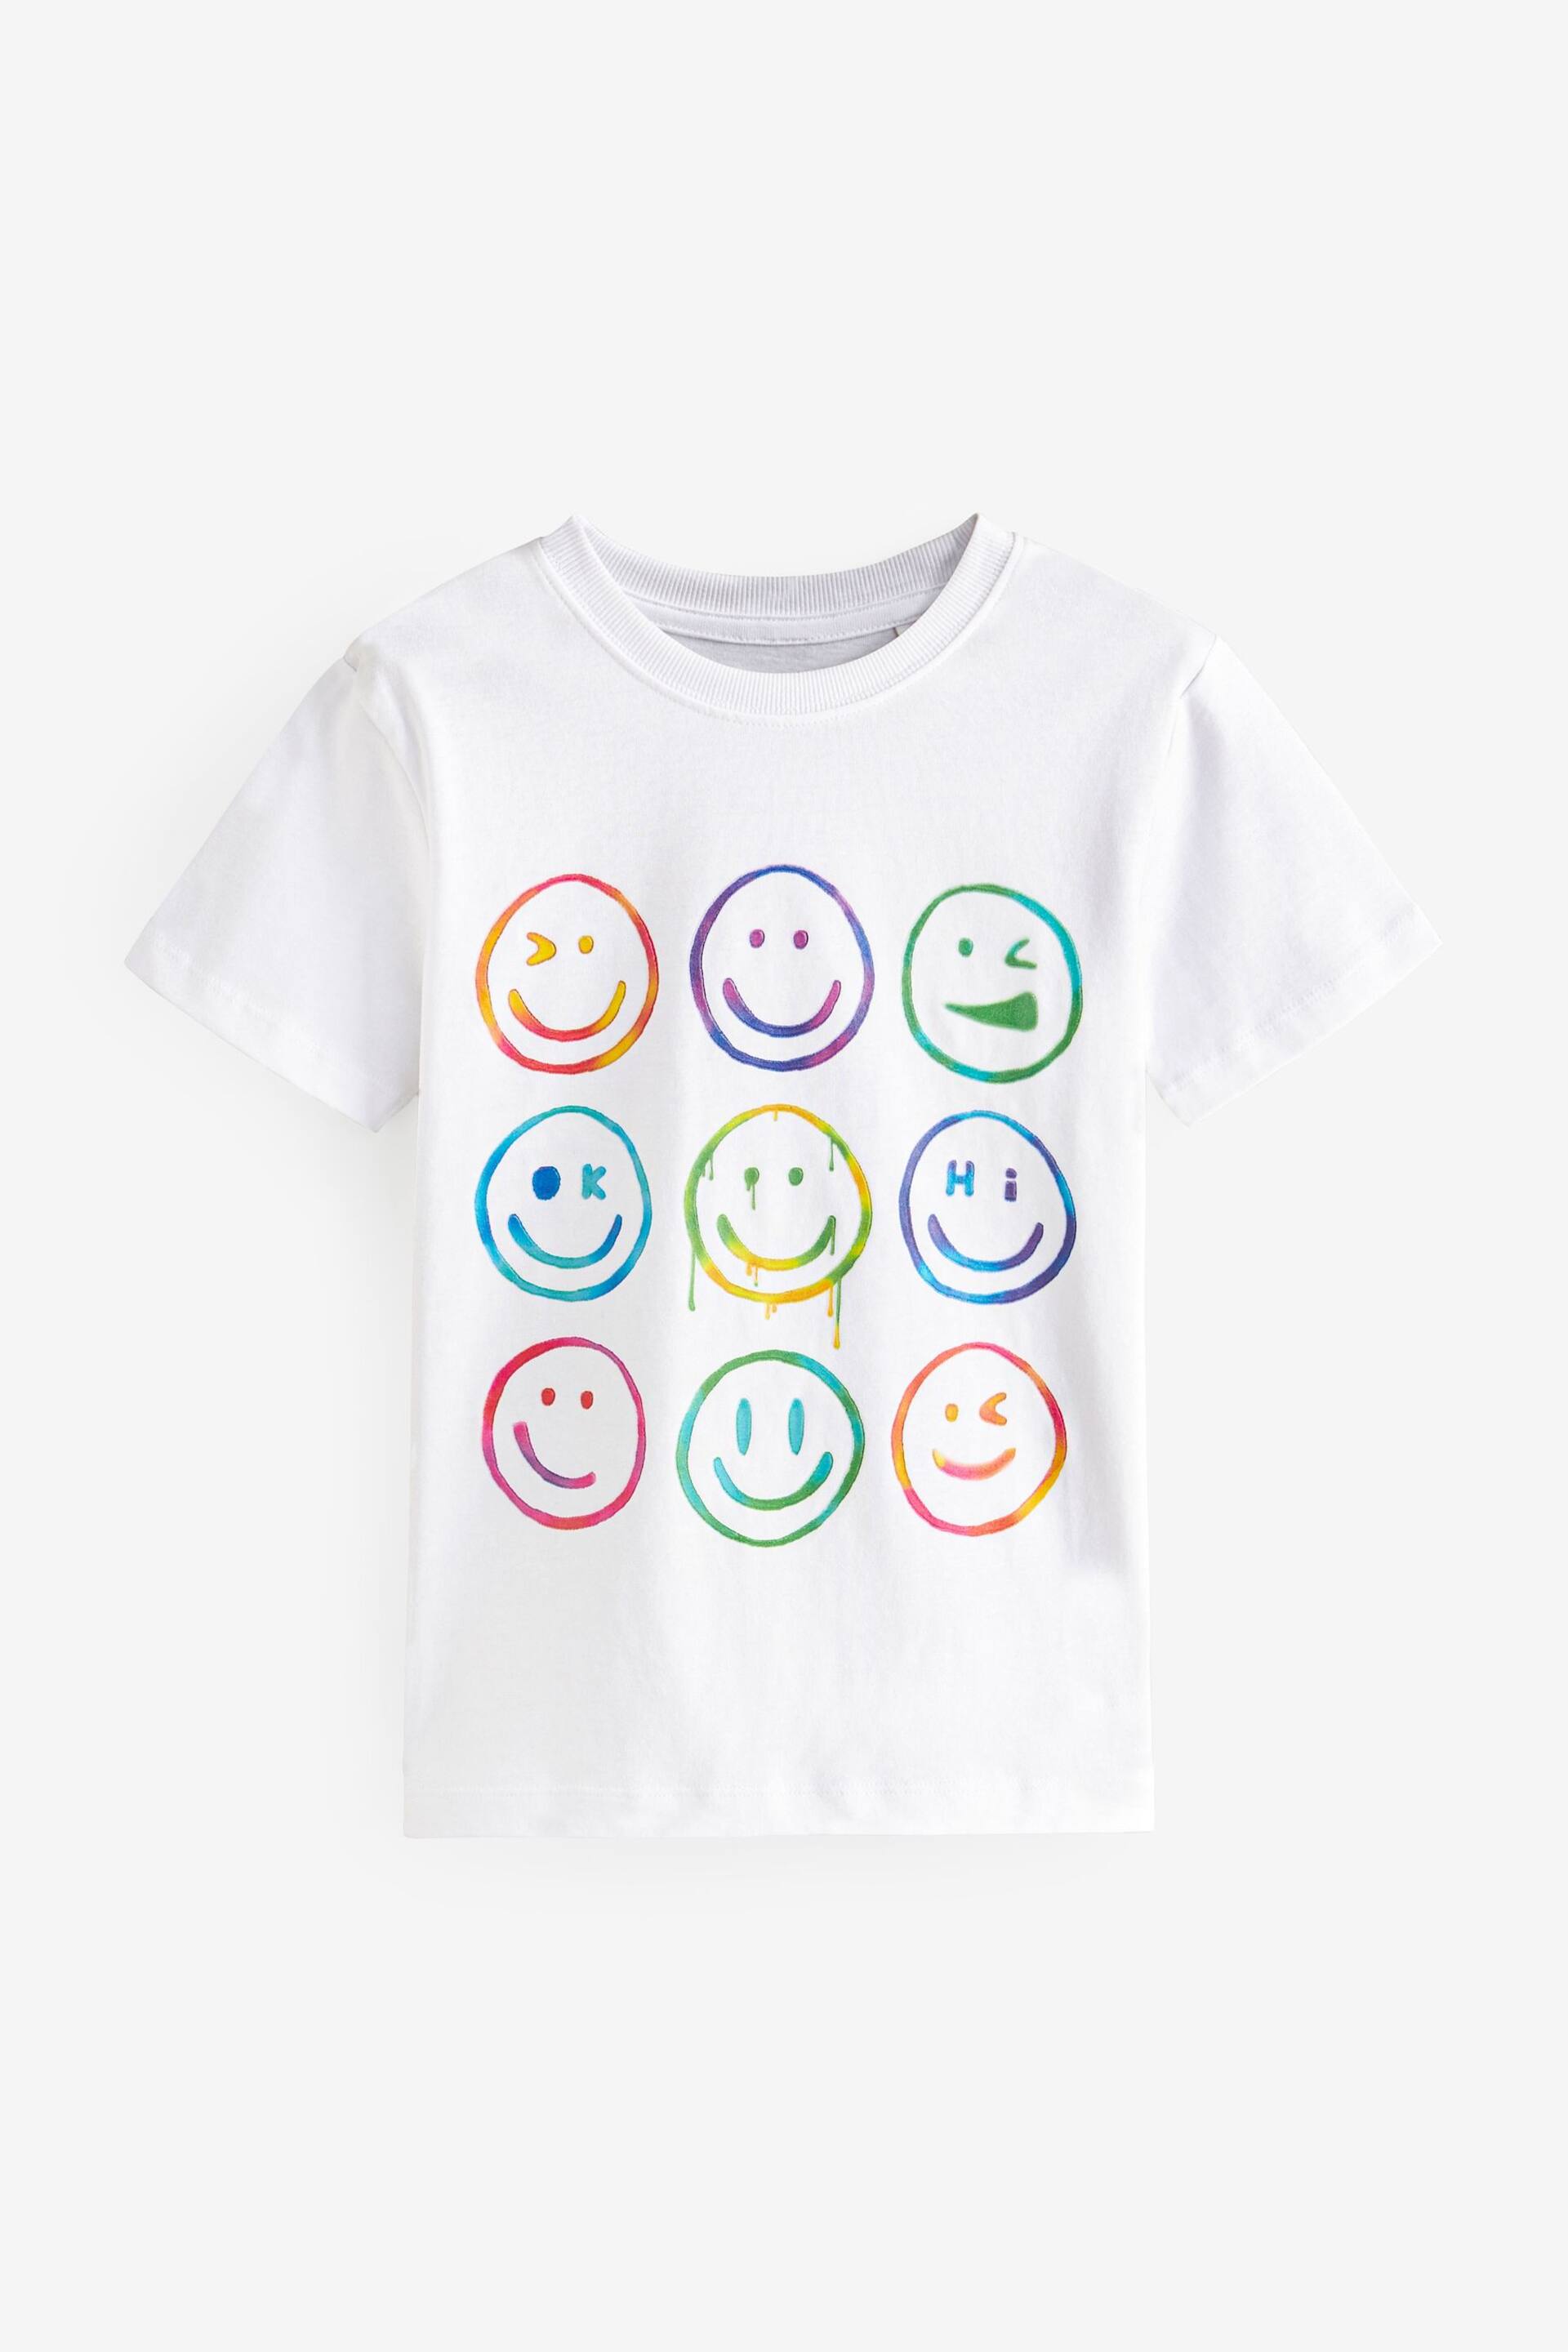 White Happy Face Short Sleeve Graphic T-Shirt (3-16yrs) - Image 1 of 3